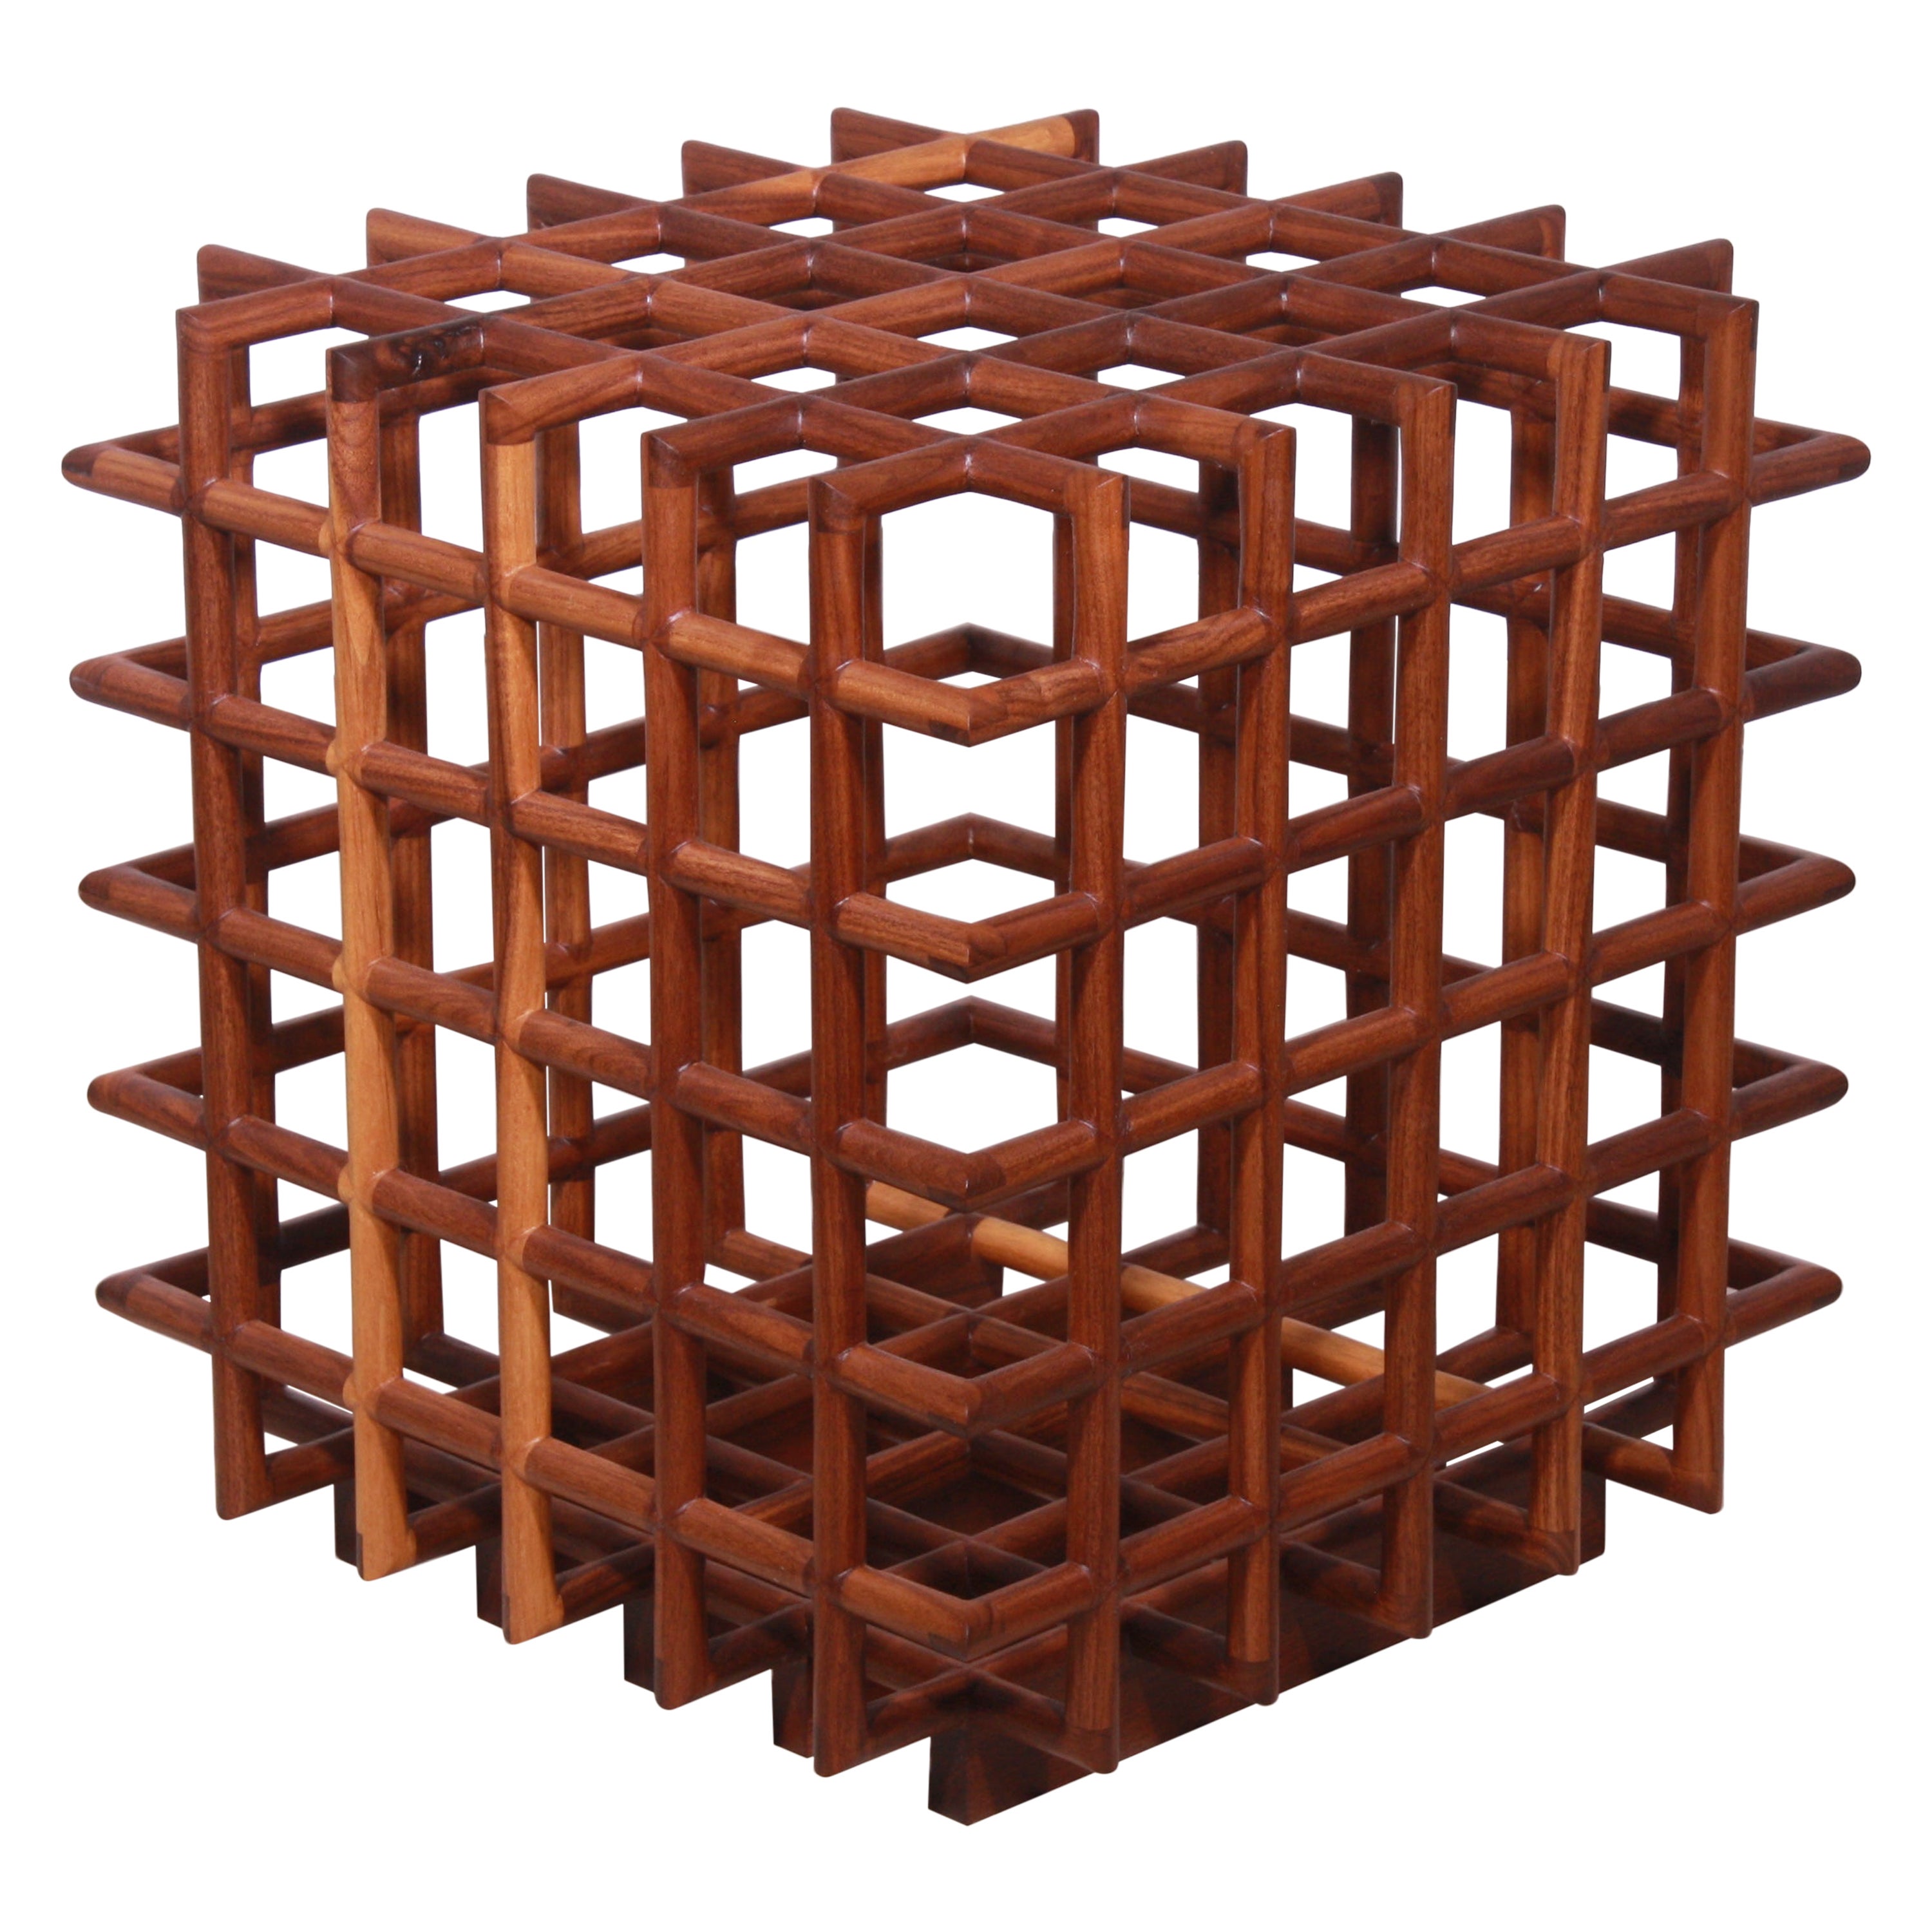 Clutch - a sculptural vessel made from hand-carved lattice by Laylo Studio For Sale